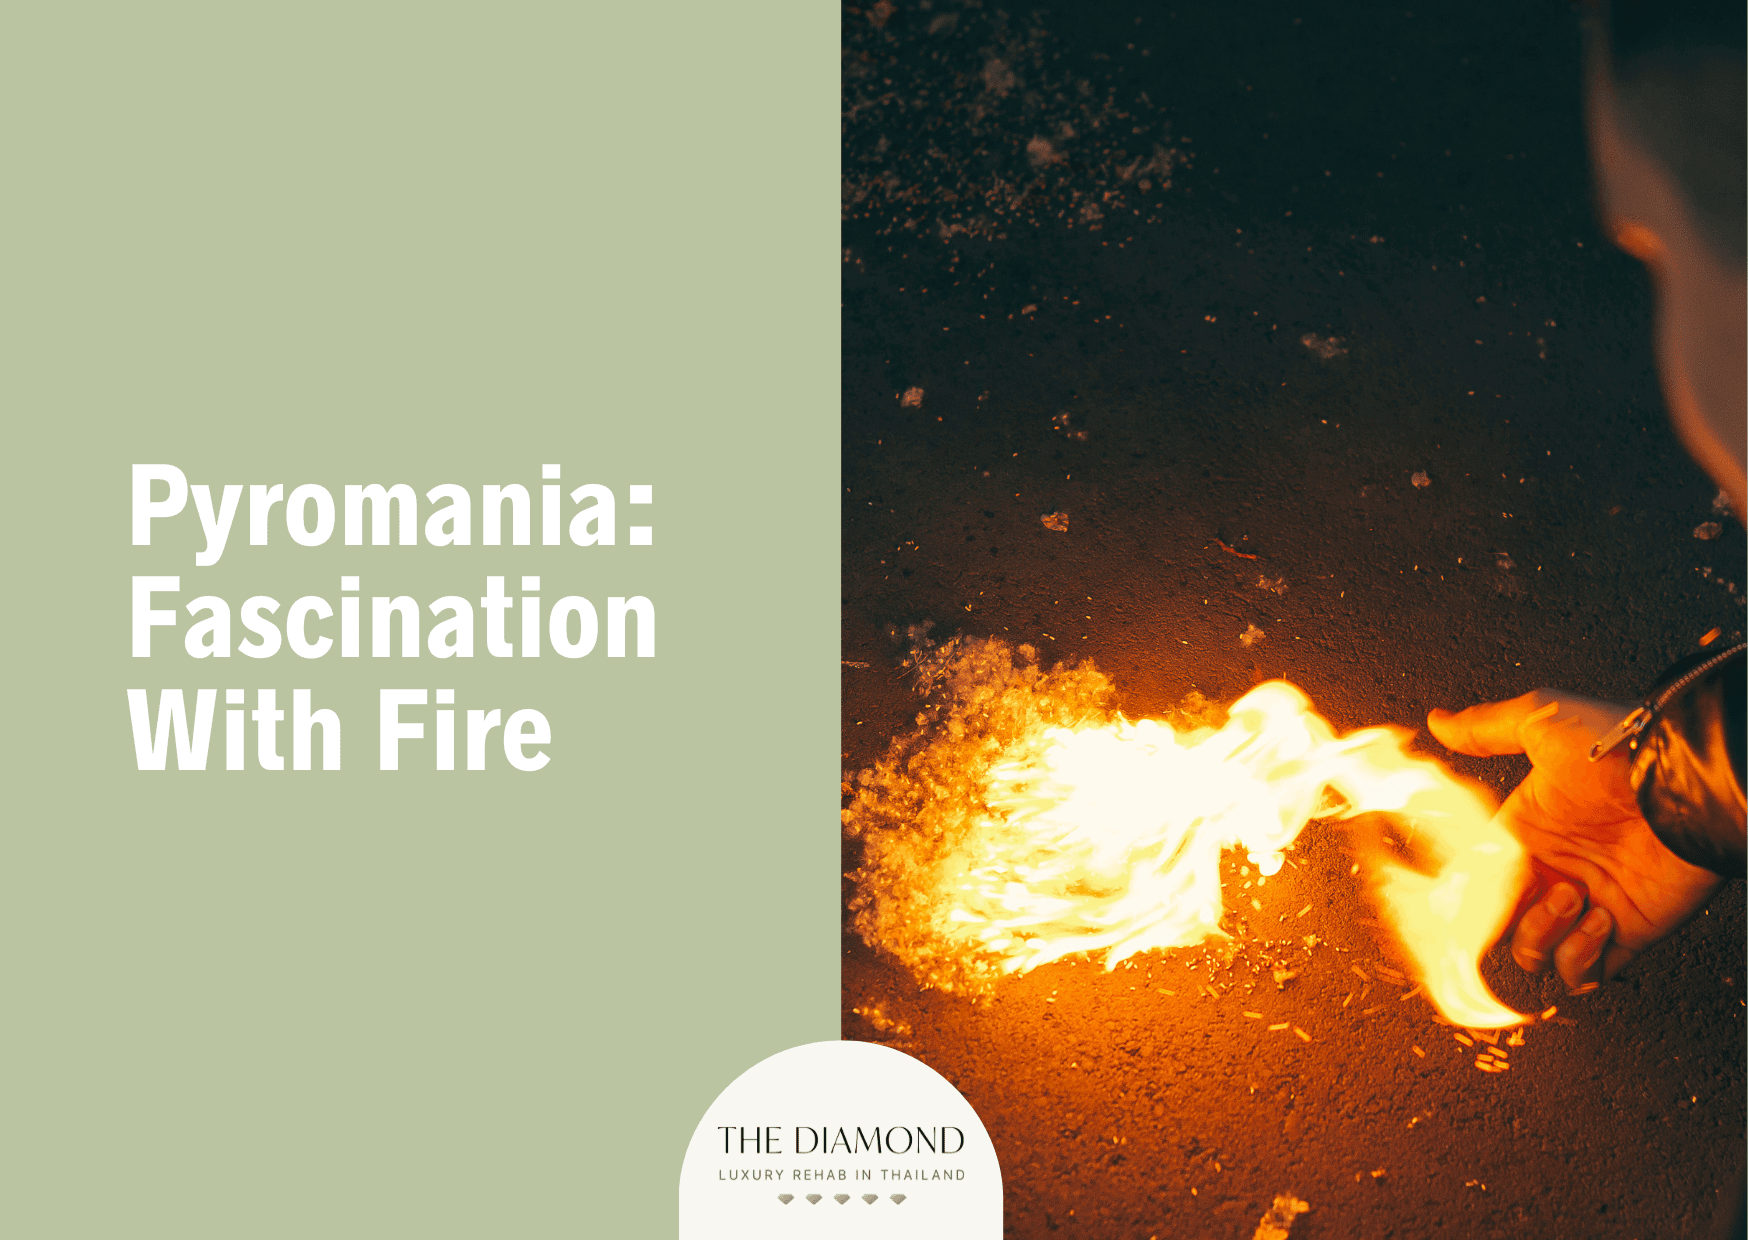 Pyromania: fascination with fire